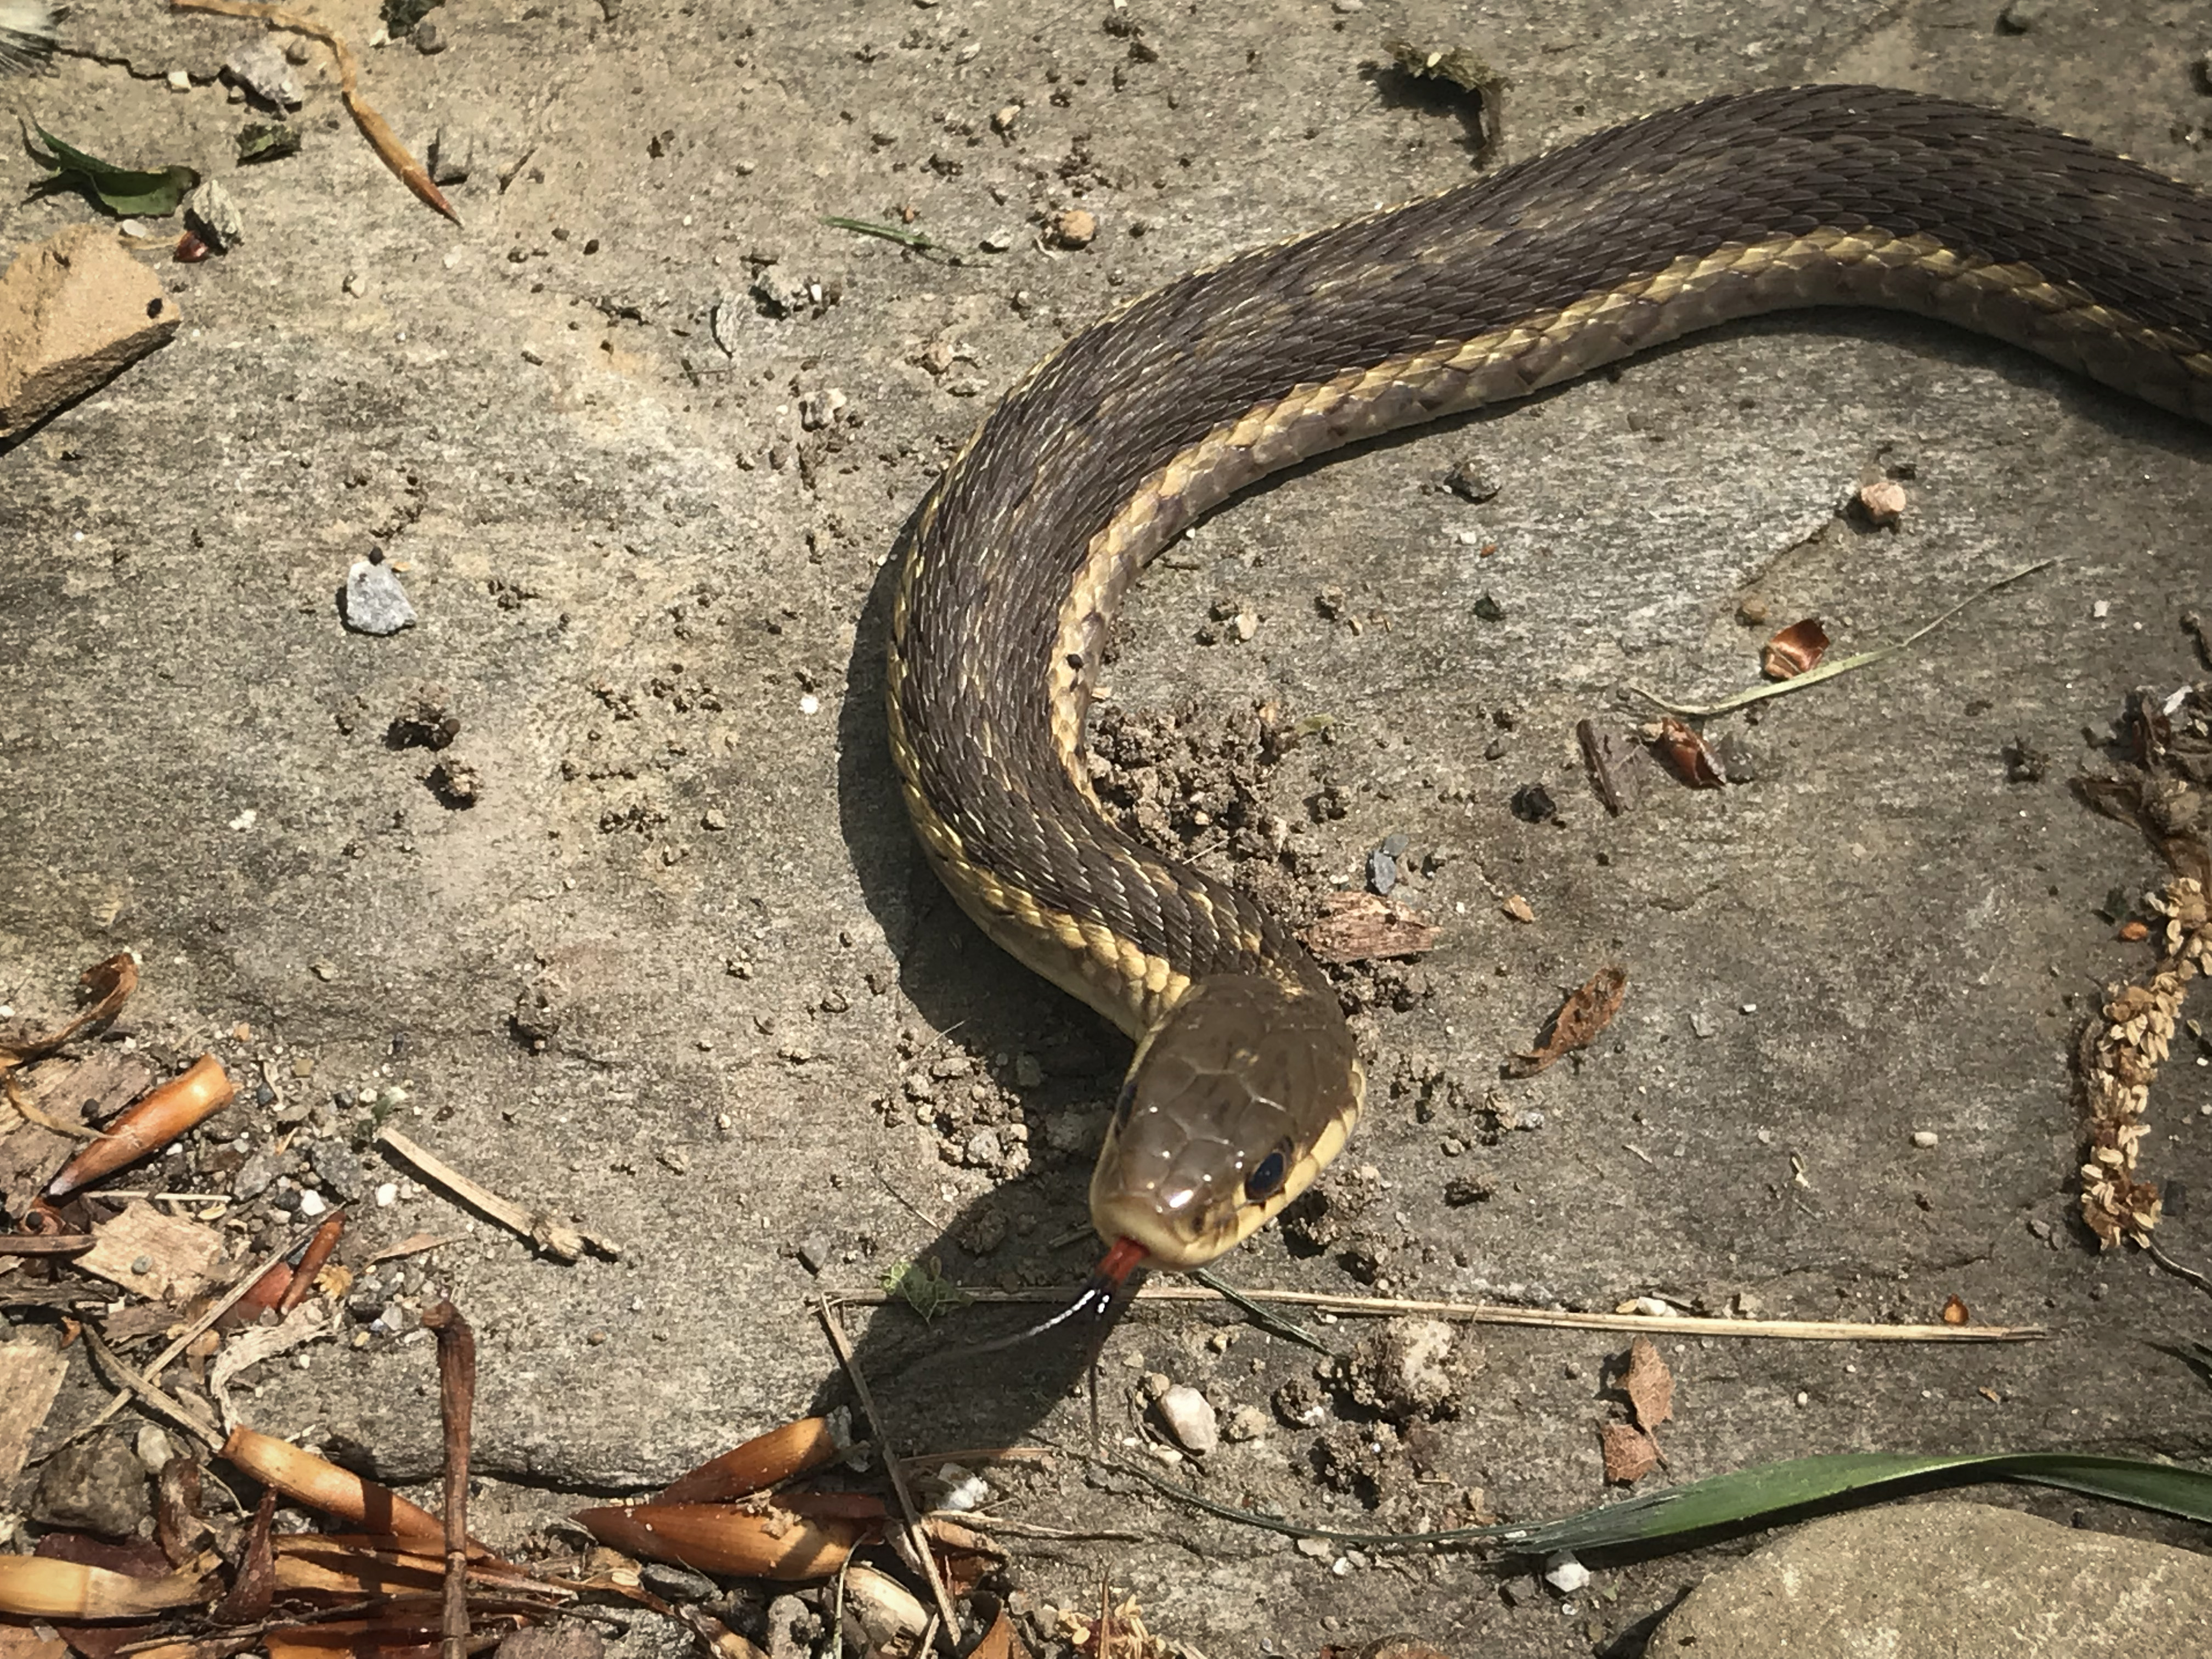 A garter snake has found shelter under stone steps between flower gardens. Garter snakes are one of the most common species of snakes to make their home in gardens. | Photo by Aislinn Sarnacki